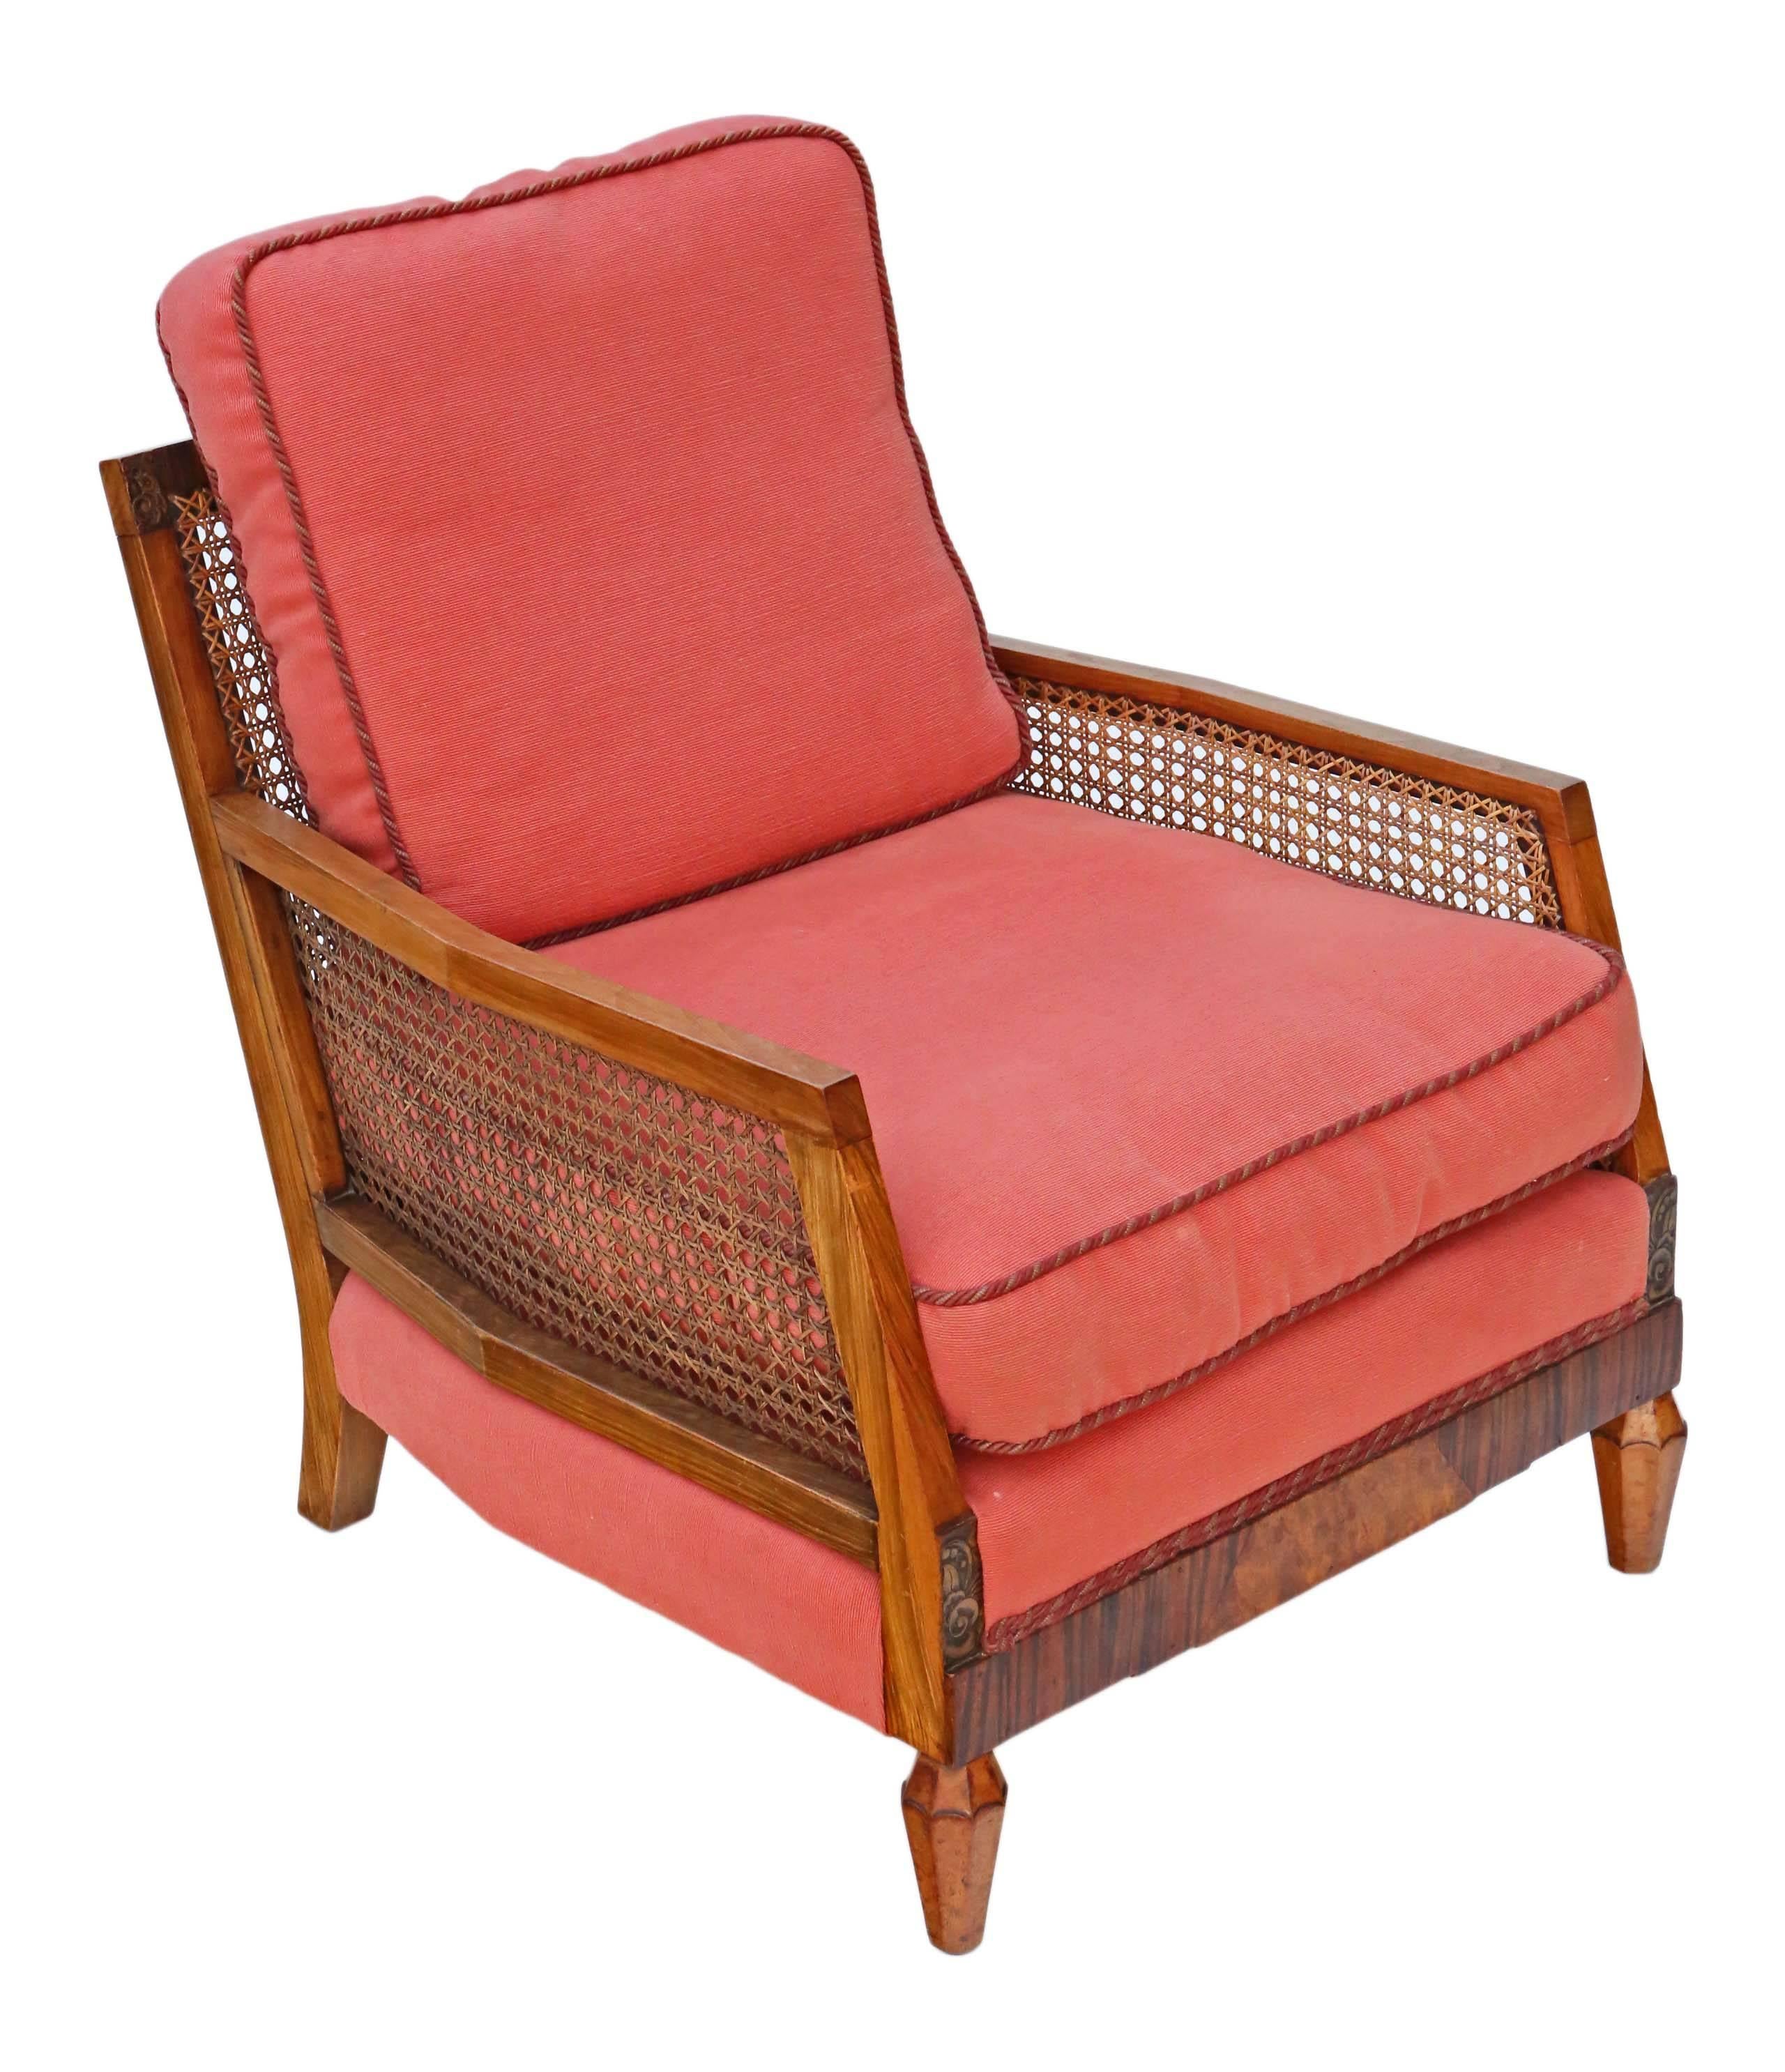 Antique Quality Art Deco Burr Walnut & Rosewood Bergere Armchair In Good Condition For Sale In Wisbech, Walton Wisbech